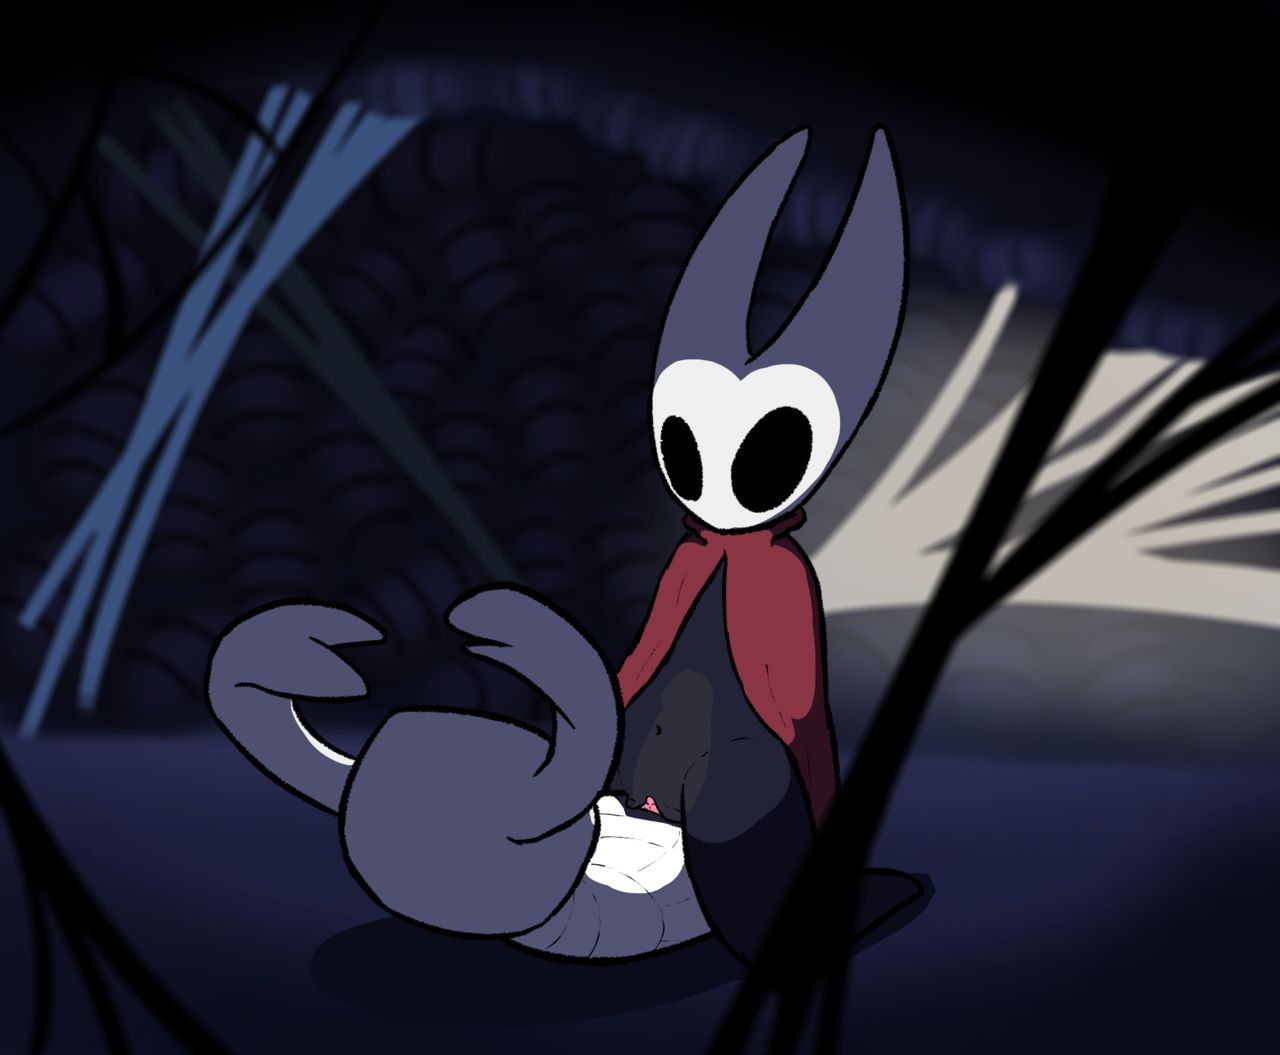 Hollow knight collection 202